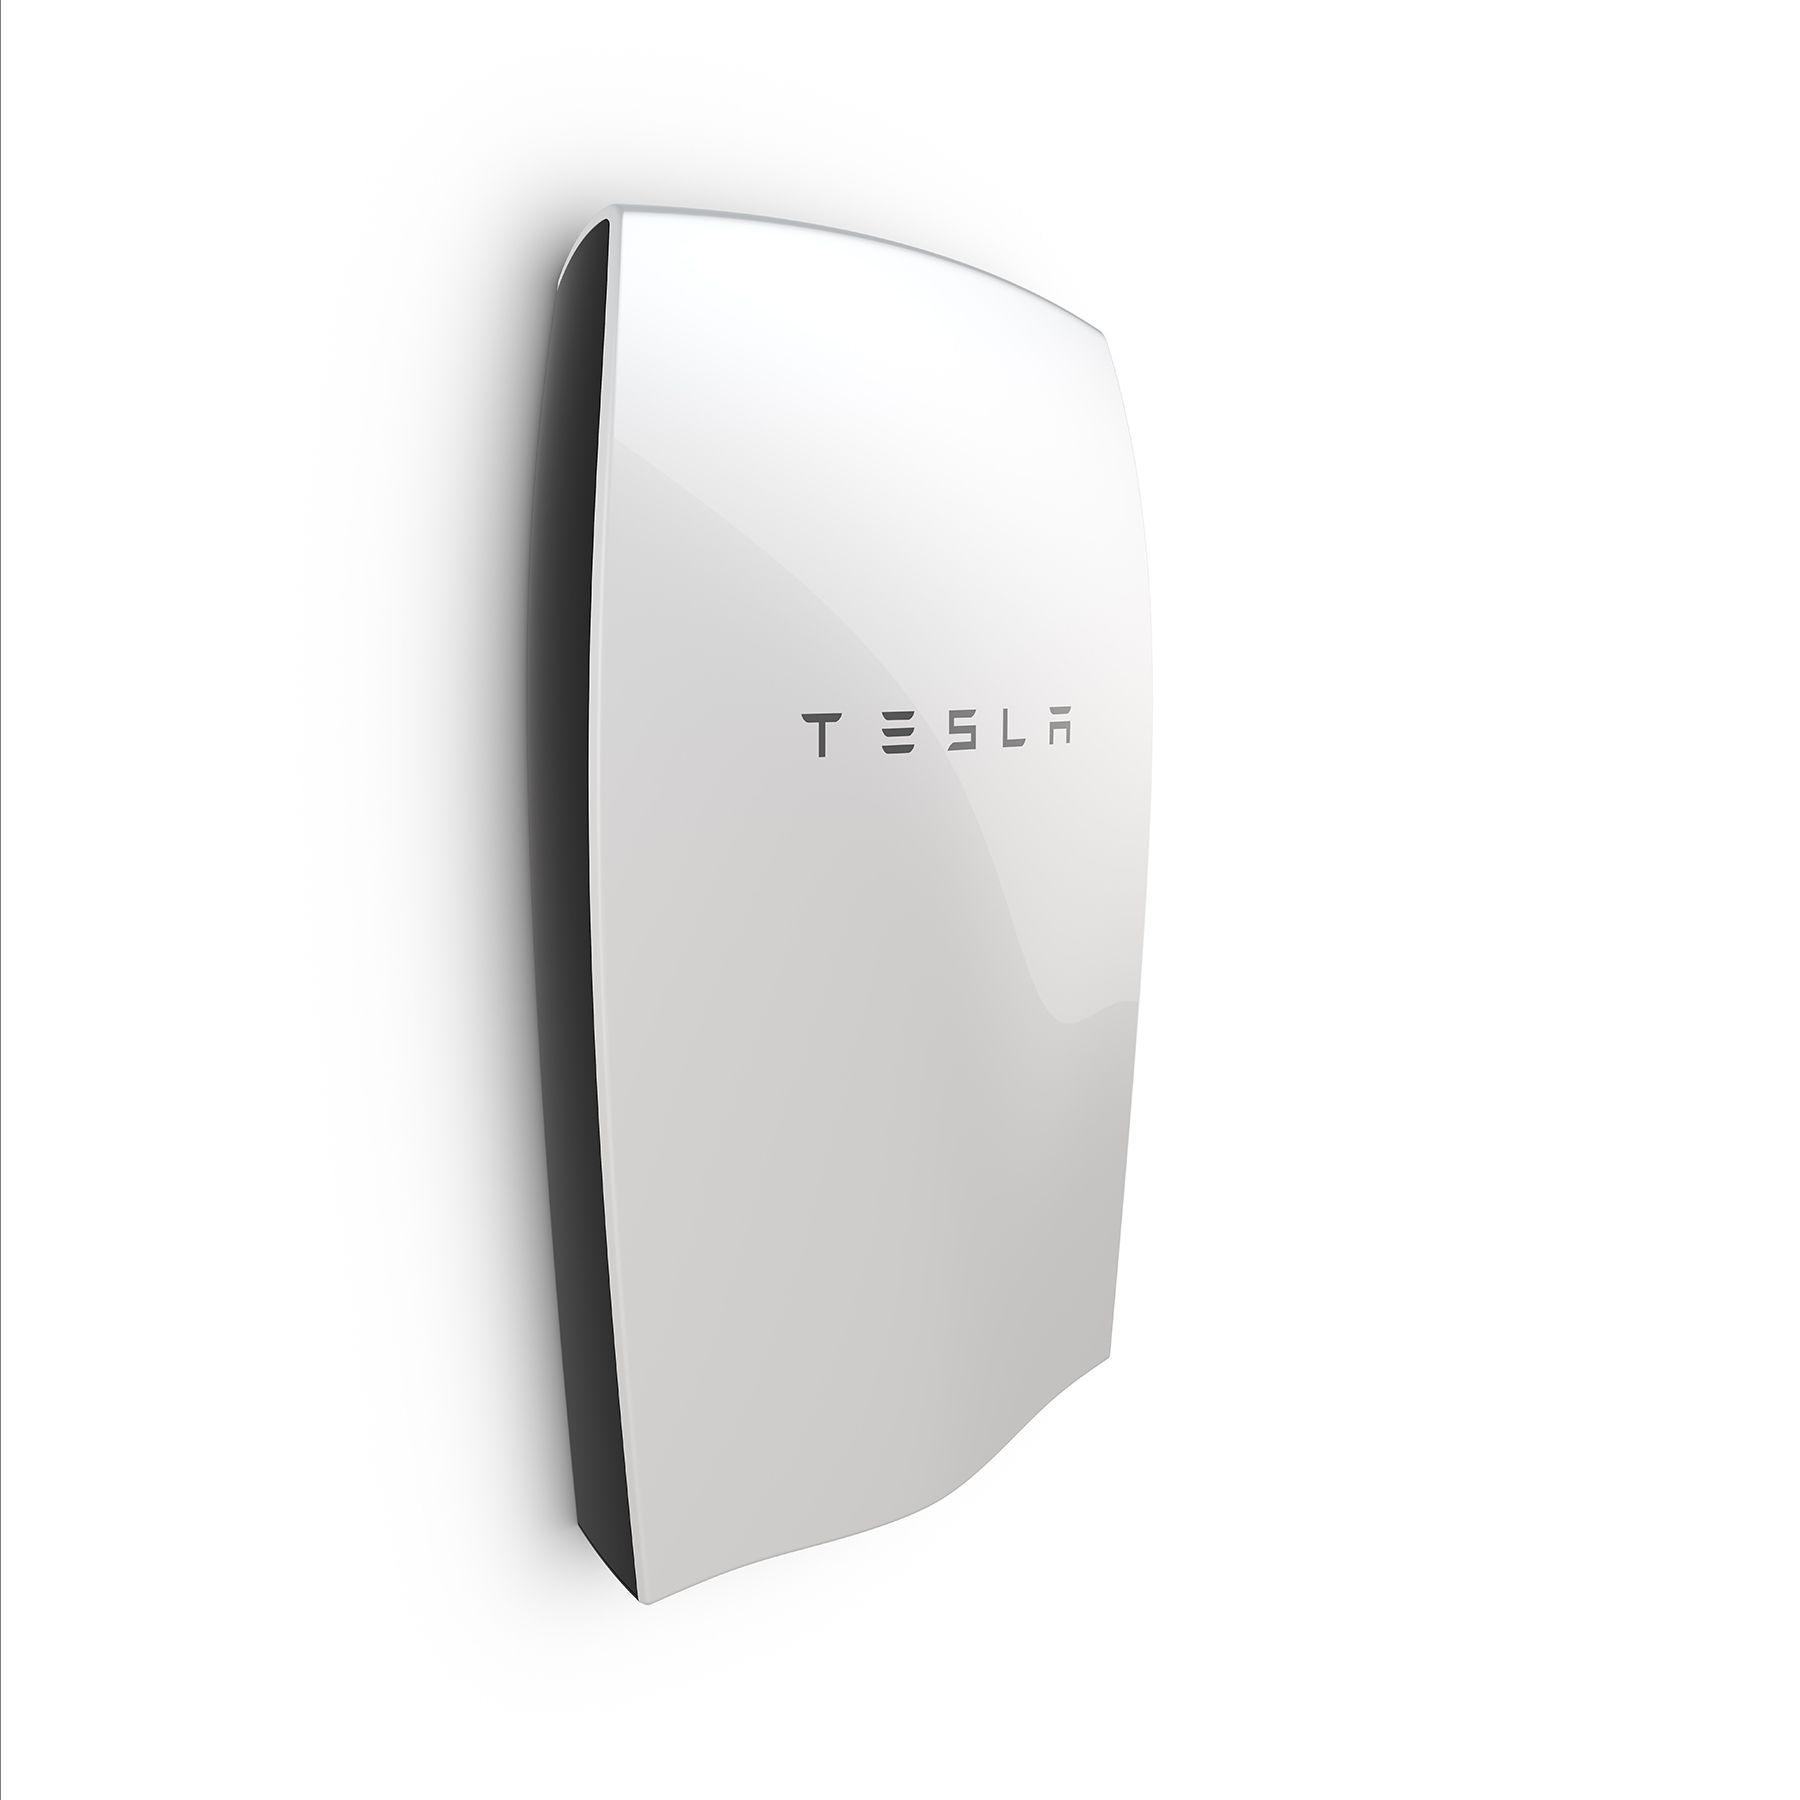 Tesla’s Big Announcement Is PowerWall: A Battery For Your Home